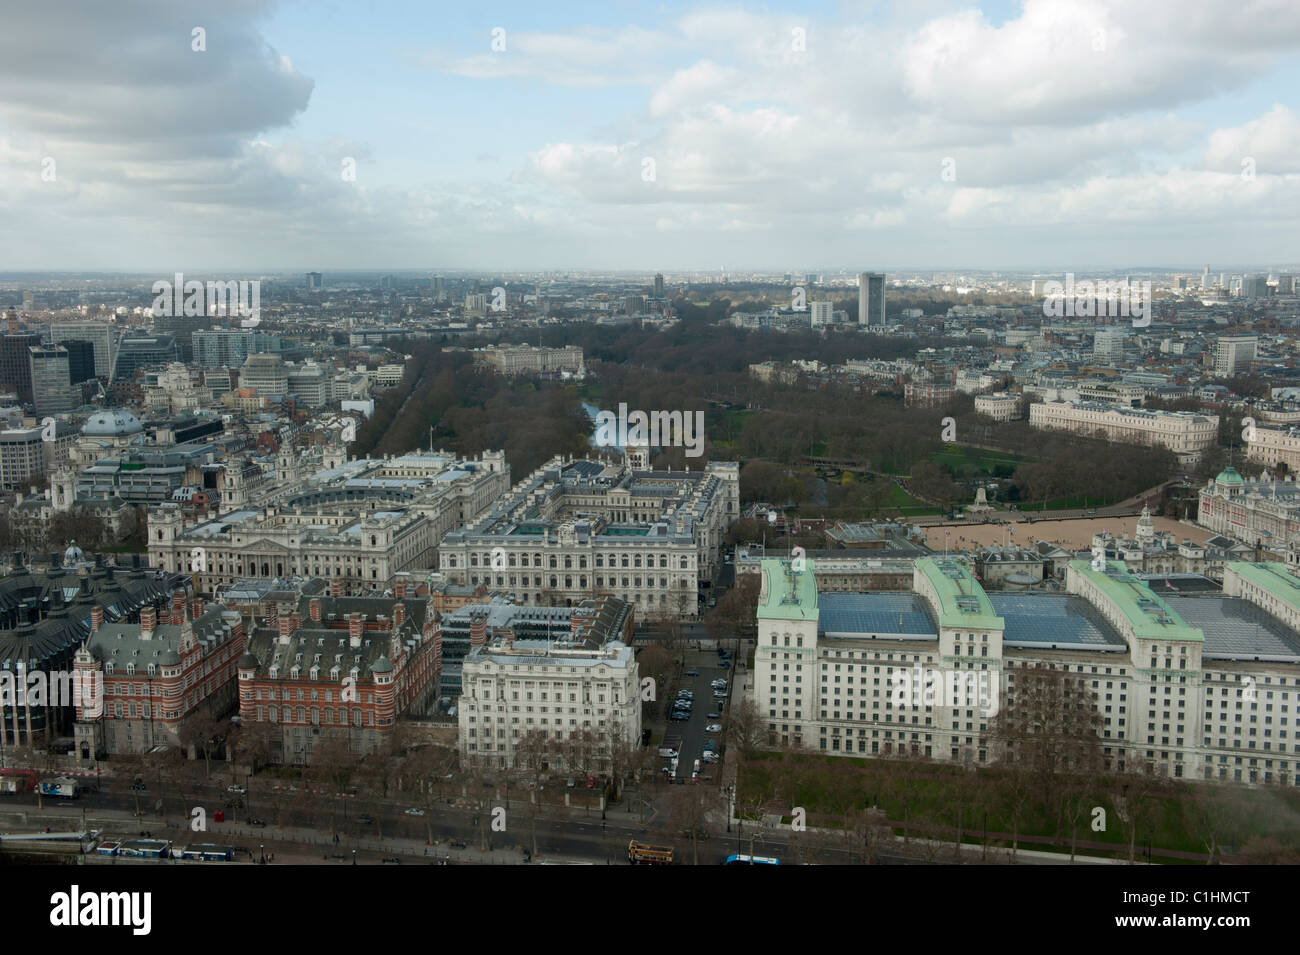 View over London, with Buckingham Palace and St Jame's Park central. Stock Photo